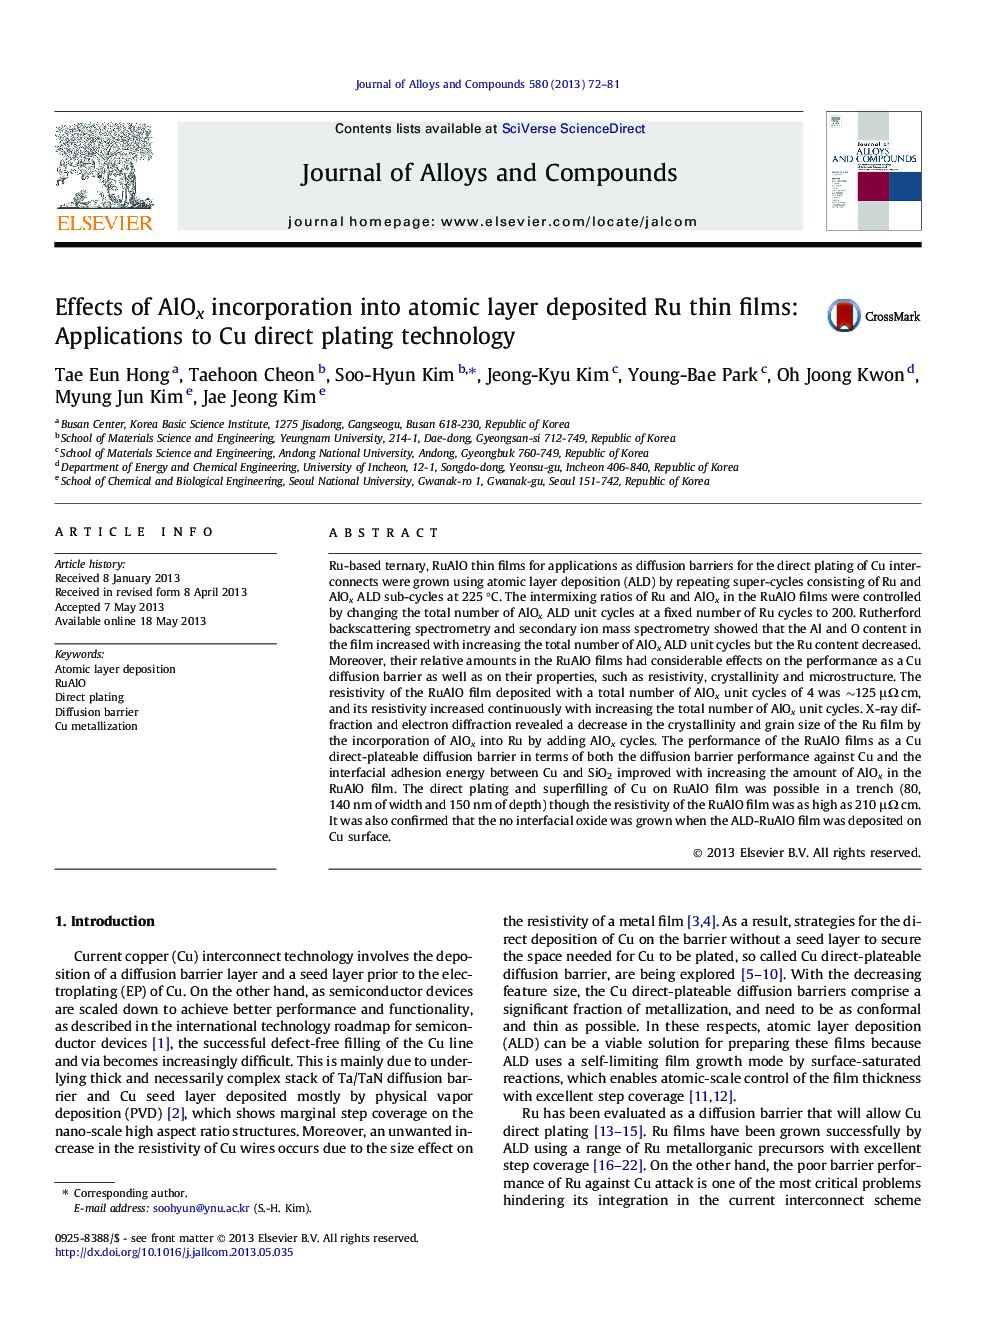 Effects of AlOx incorporation into atomic layer deposited Ru thin films: Applications to Cu direct plating technology